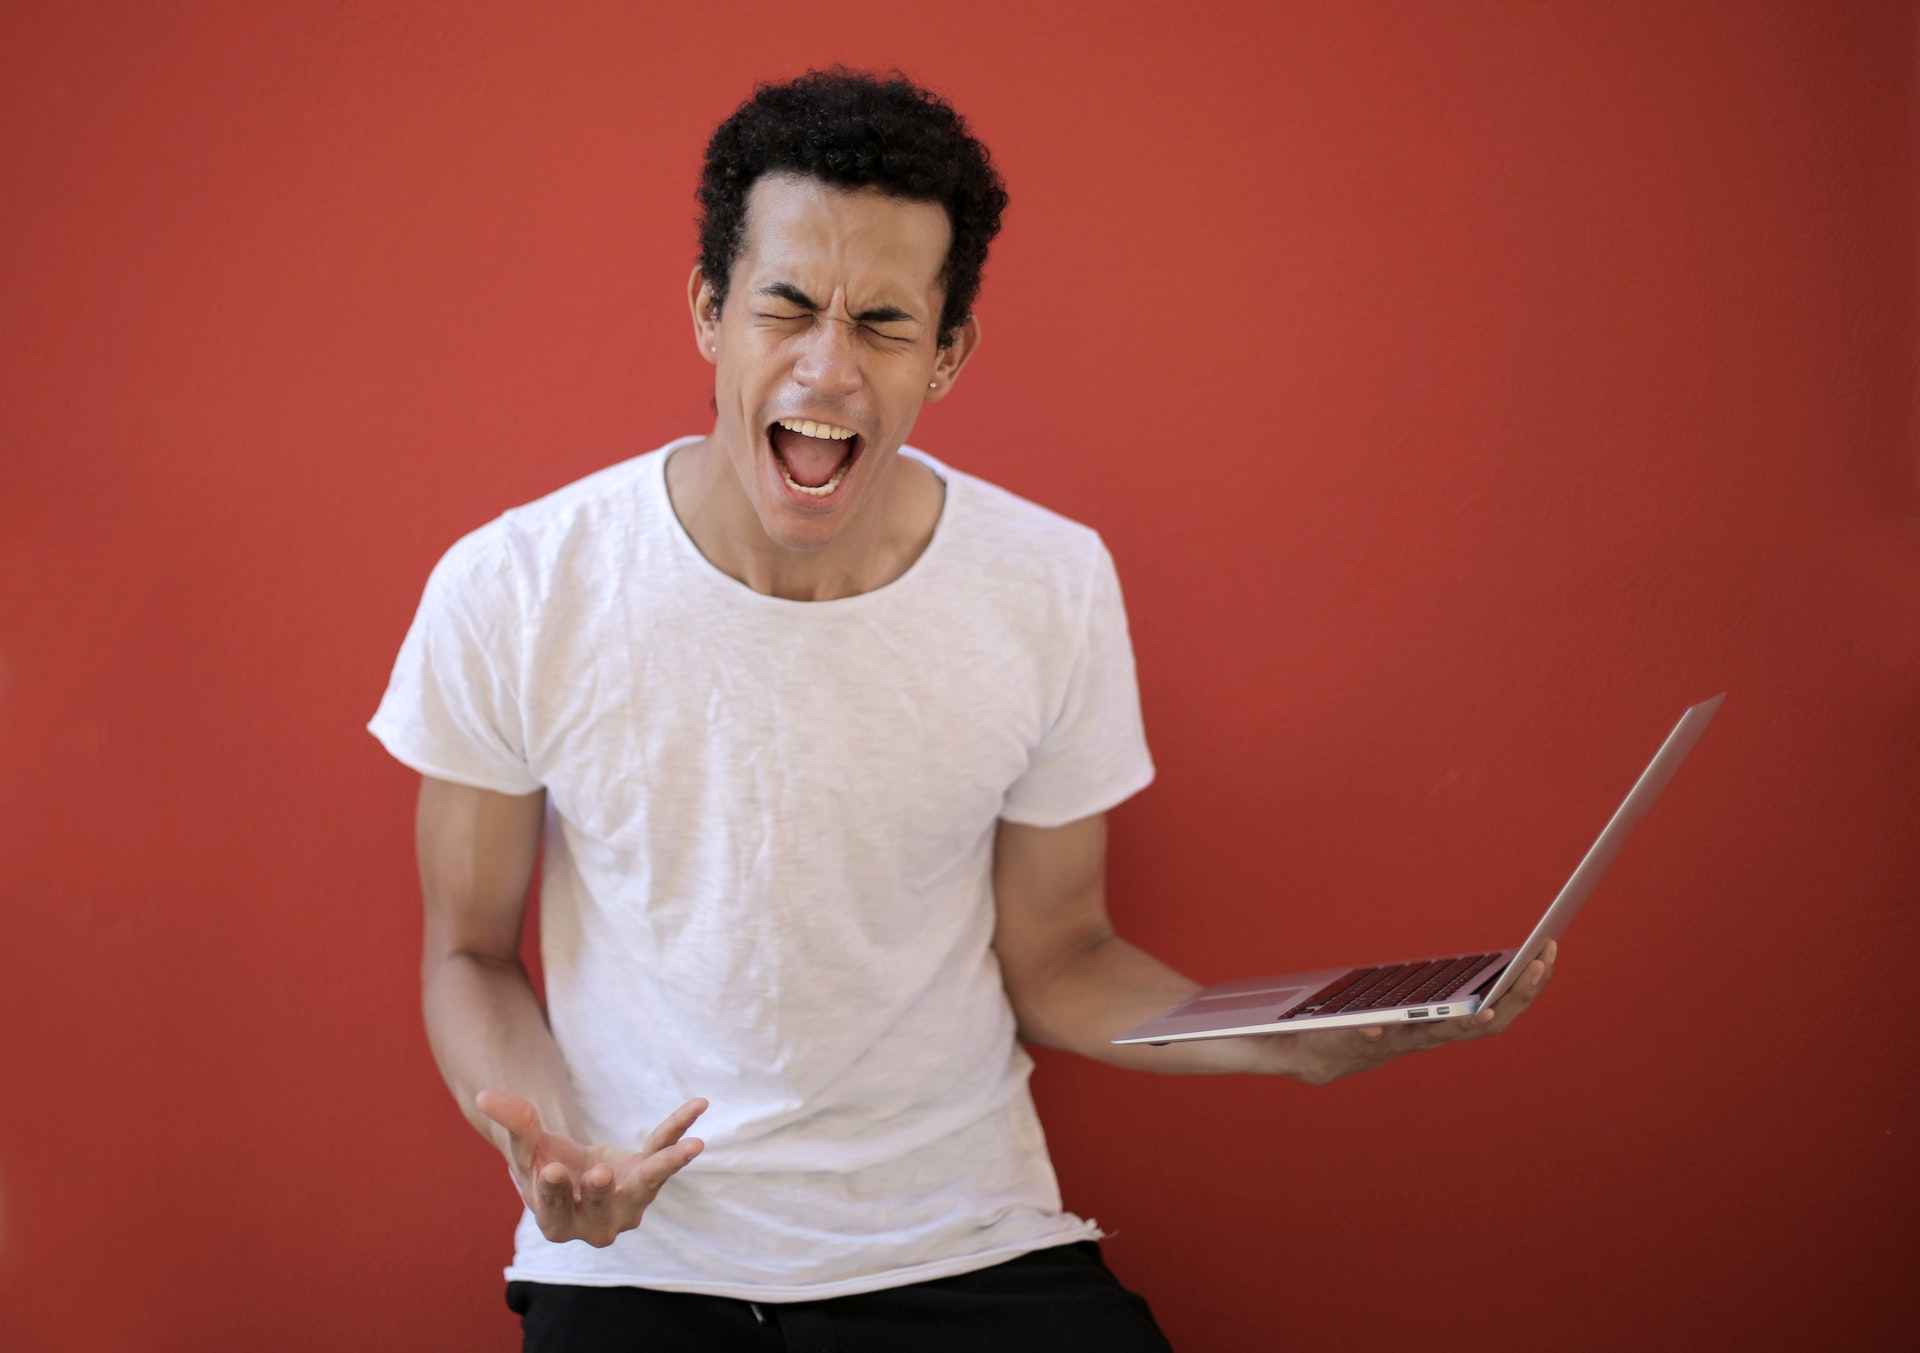 person in white t shirt holding laptop screaming in front of red background